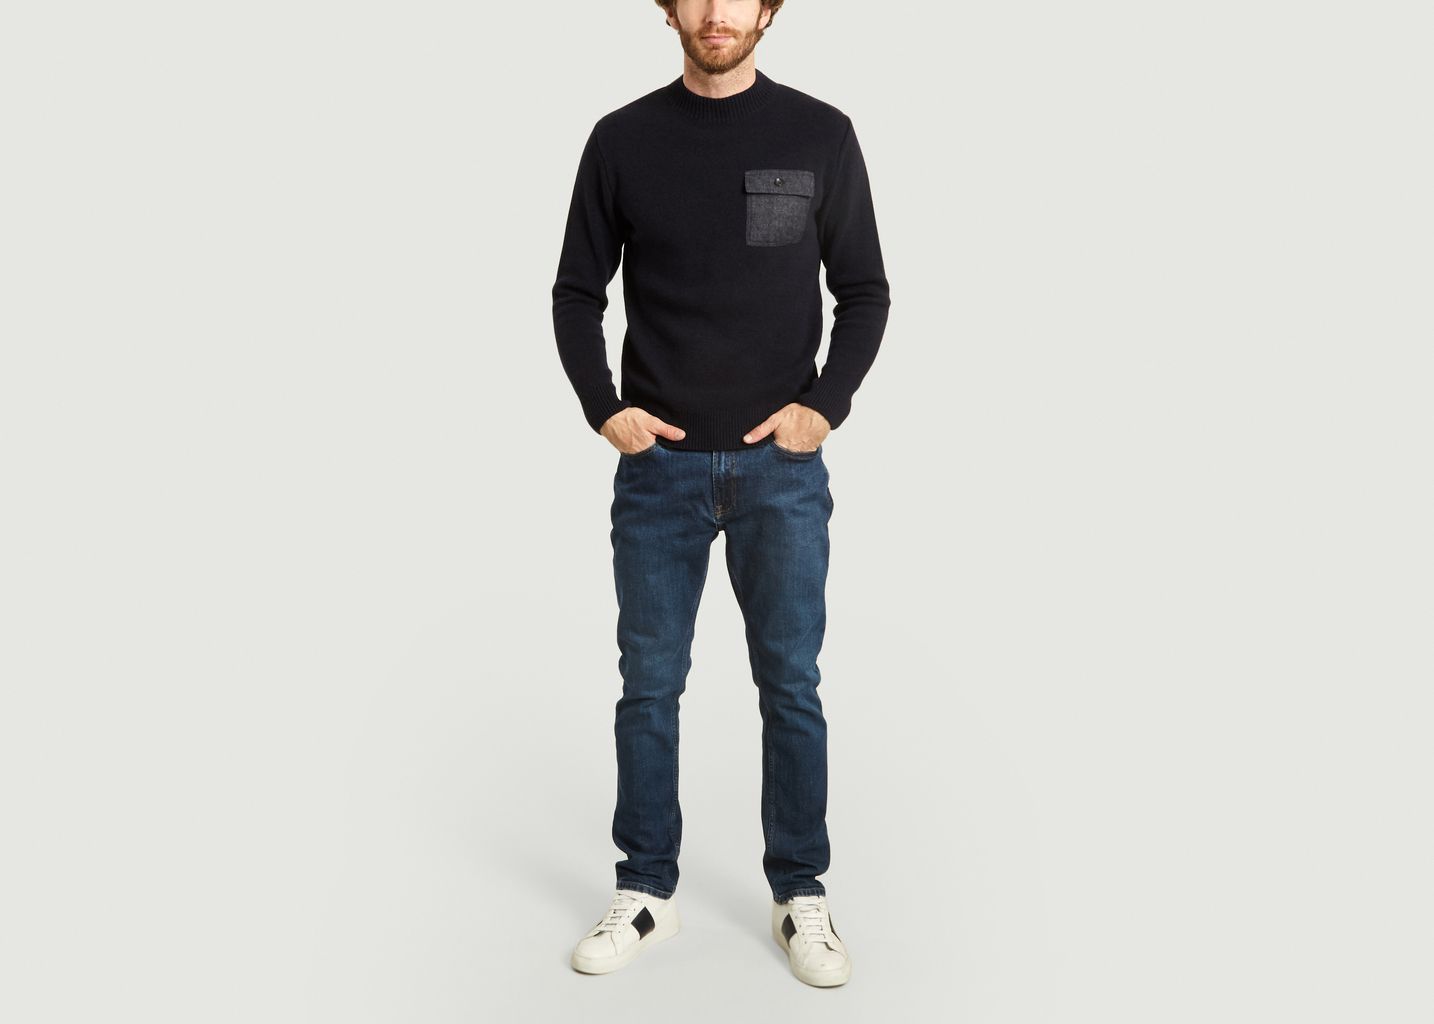 Embrun sweater with pocket - Olow